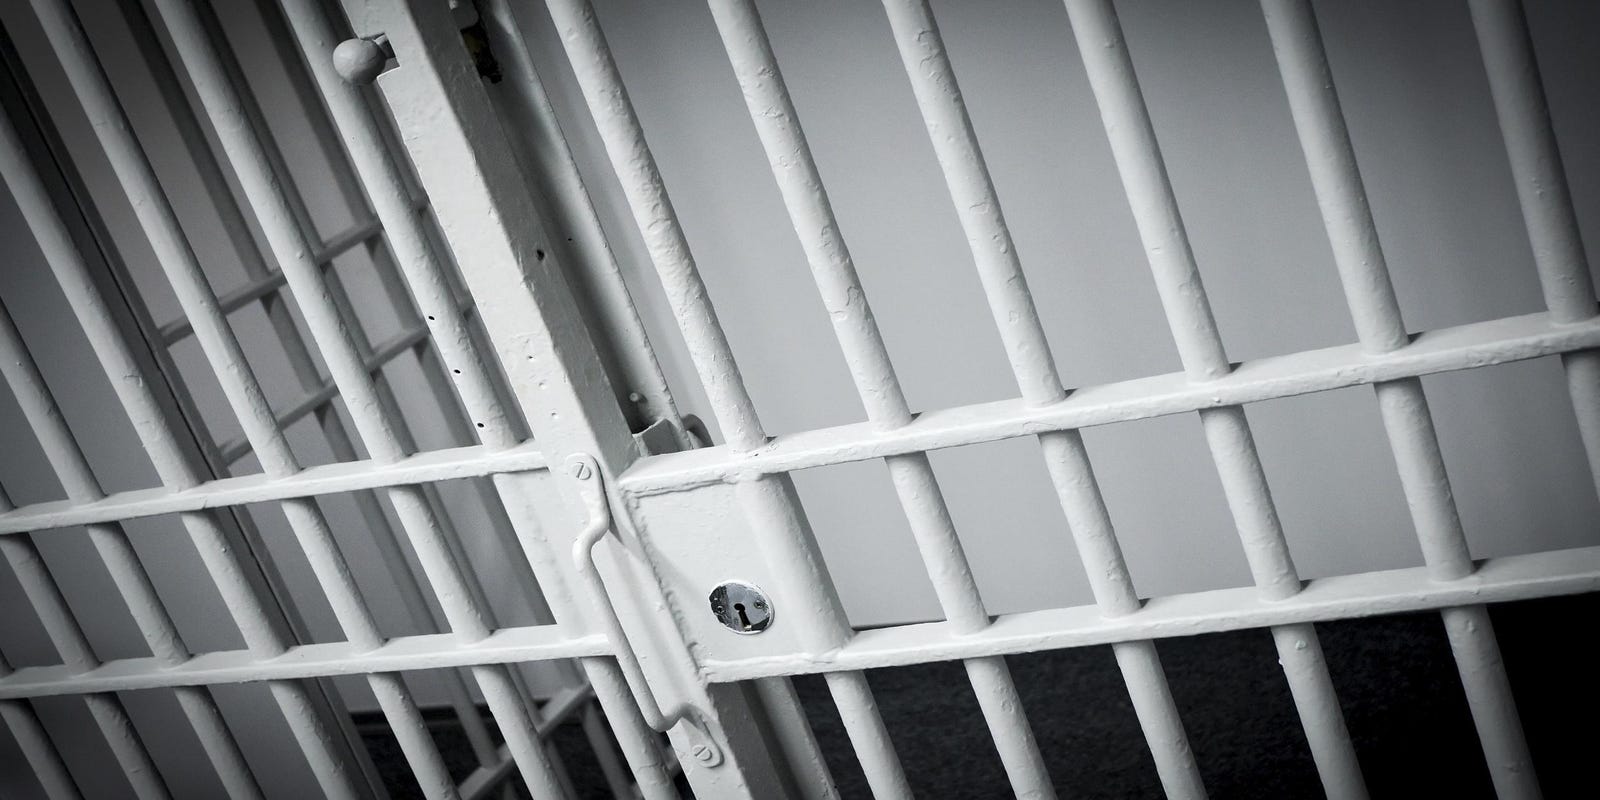 Officer Indicted For Smuggling Drugs Into Youth Jail